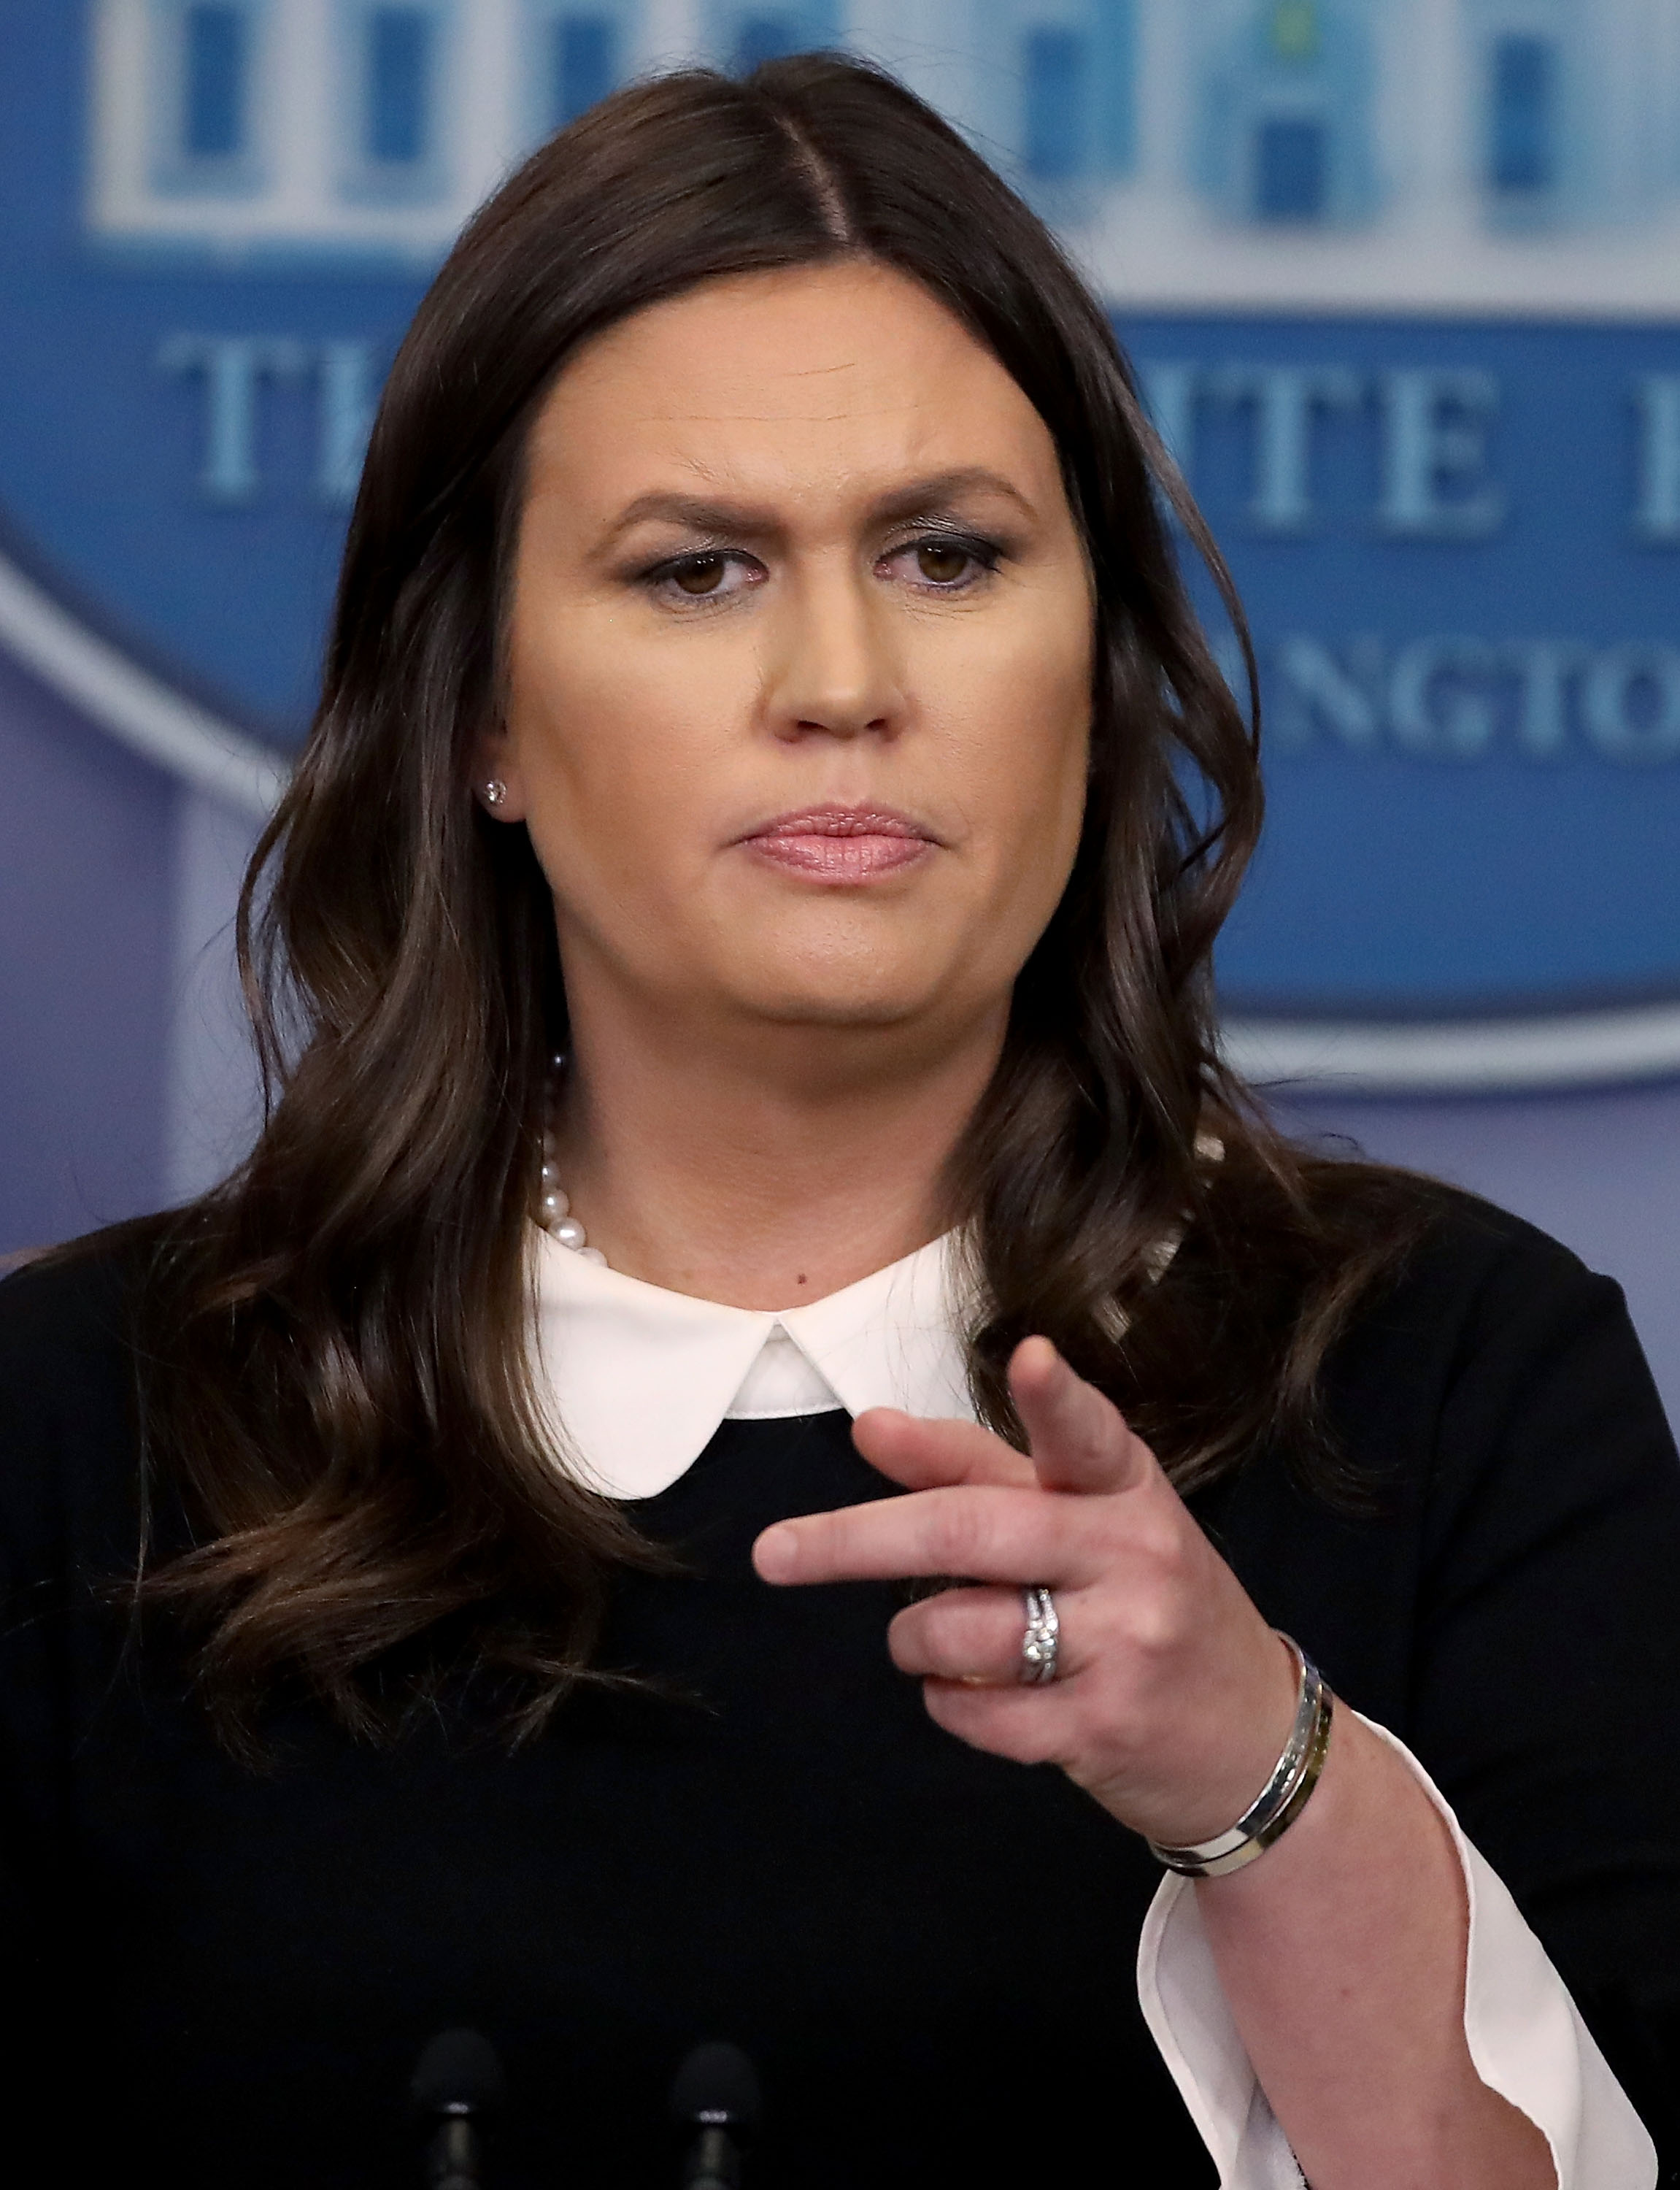 WASHINGTON, DC - MARCH 27: White House Press Secretary Sarah Huckabee Sanders briefs reporters in the White House Briefing Room on March 27, 2018 in Washington, DC. (Photo by Mark Wilson/Getty Images)